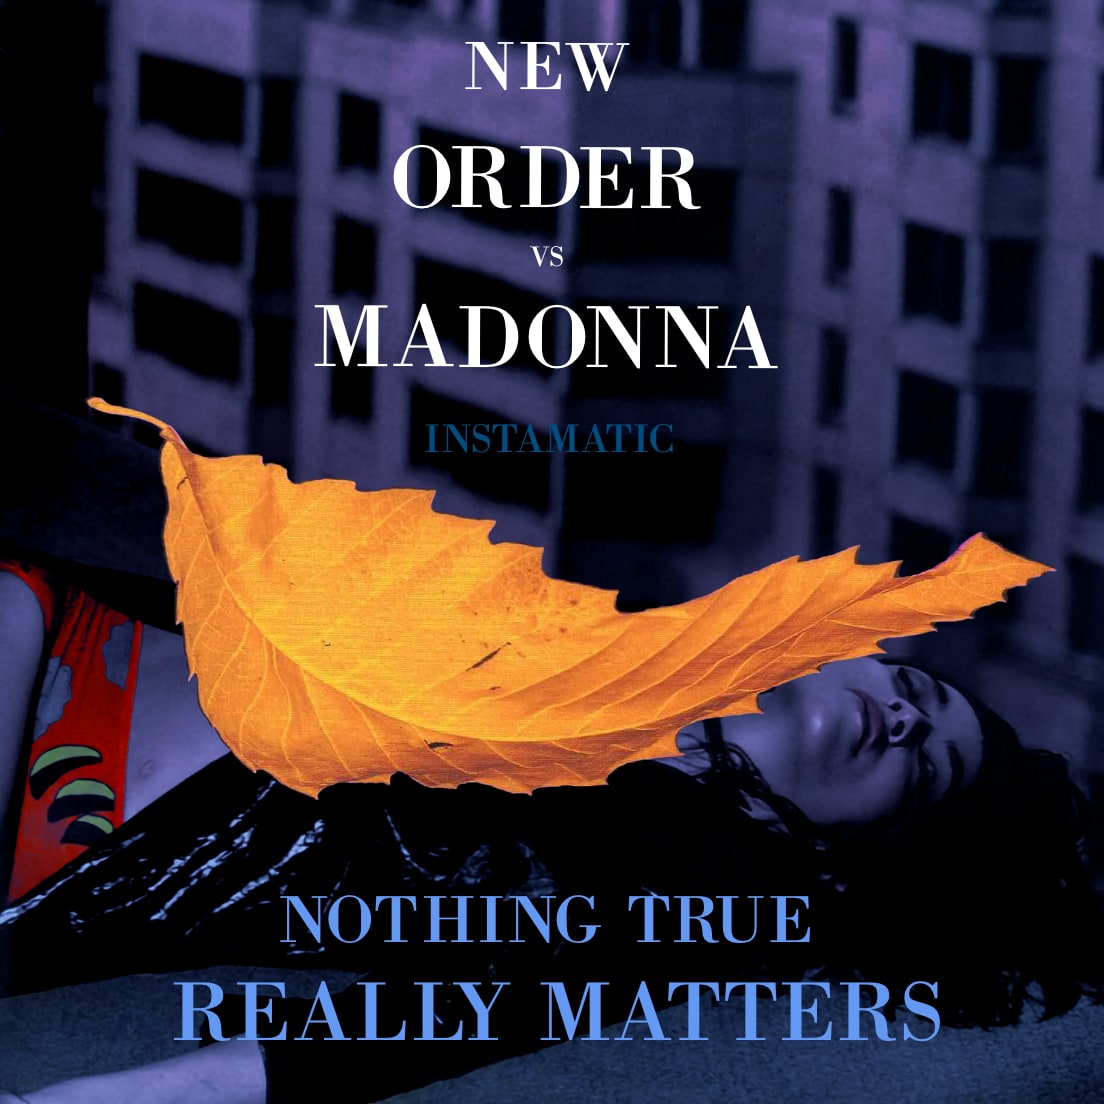 Madonna in Squished By A Giant Gold Leaf SHOCKAH! Instamatic - Nothing True Really Matters (New Order vs Madonna) mashup bootleg bastard pop cover